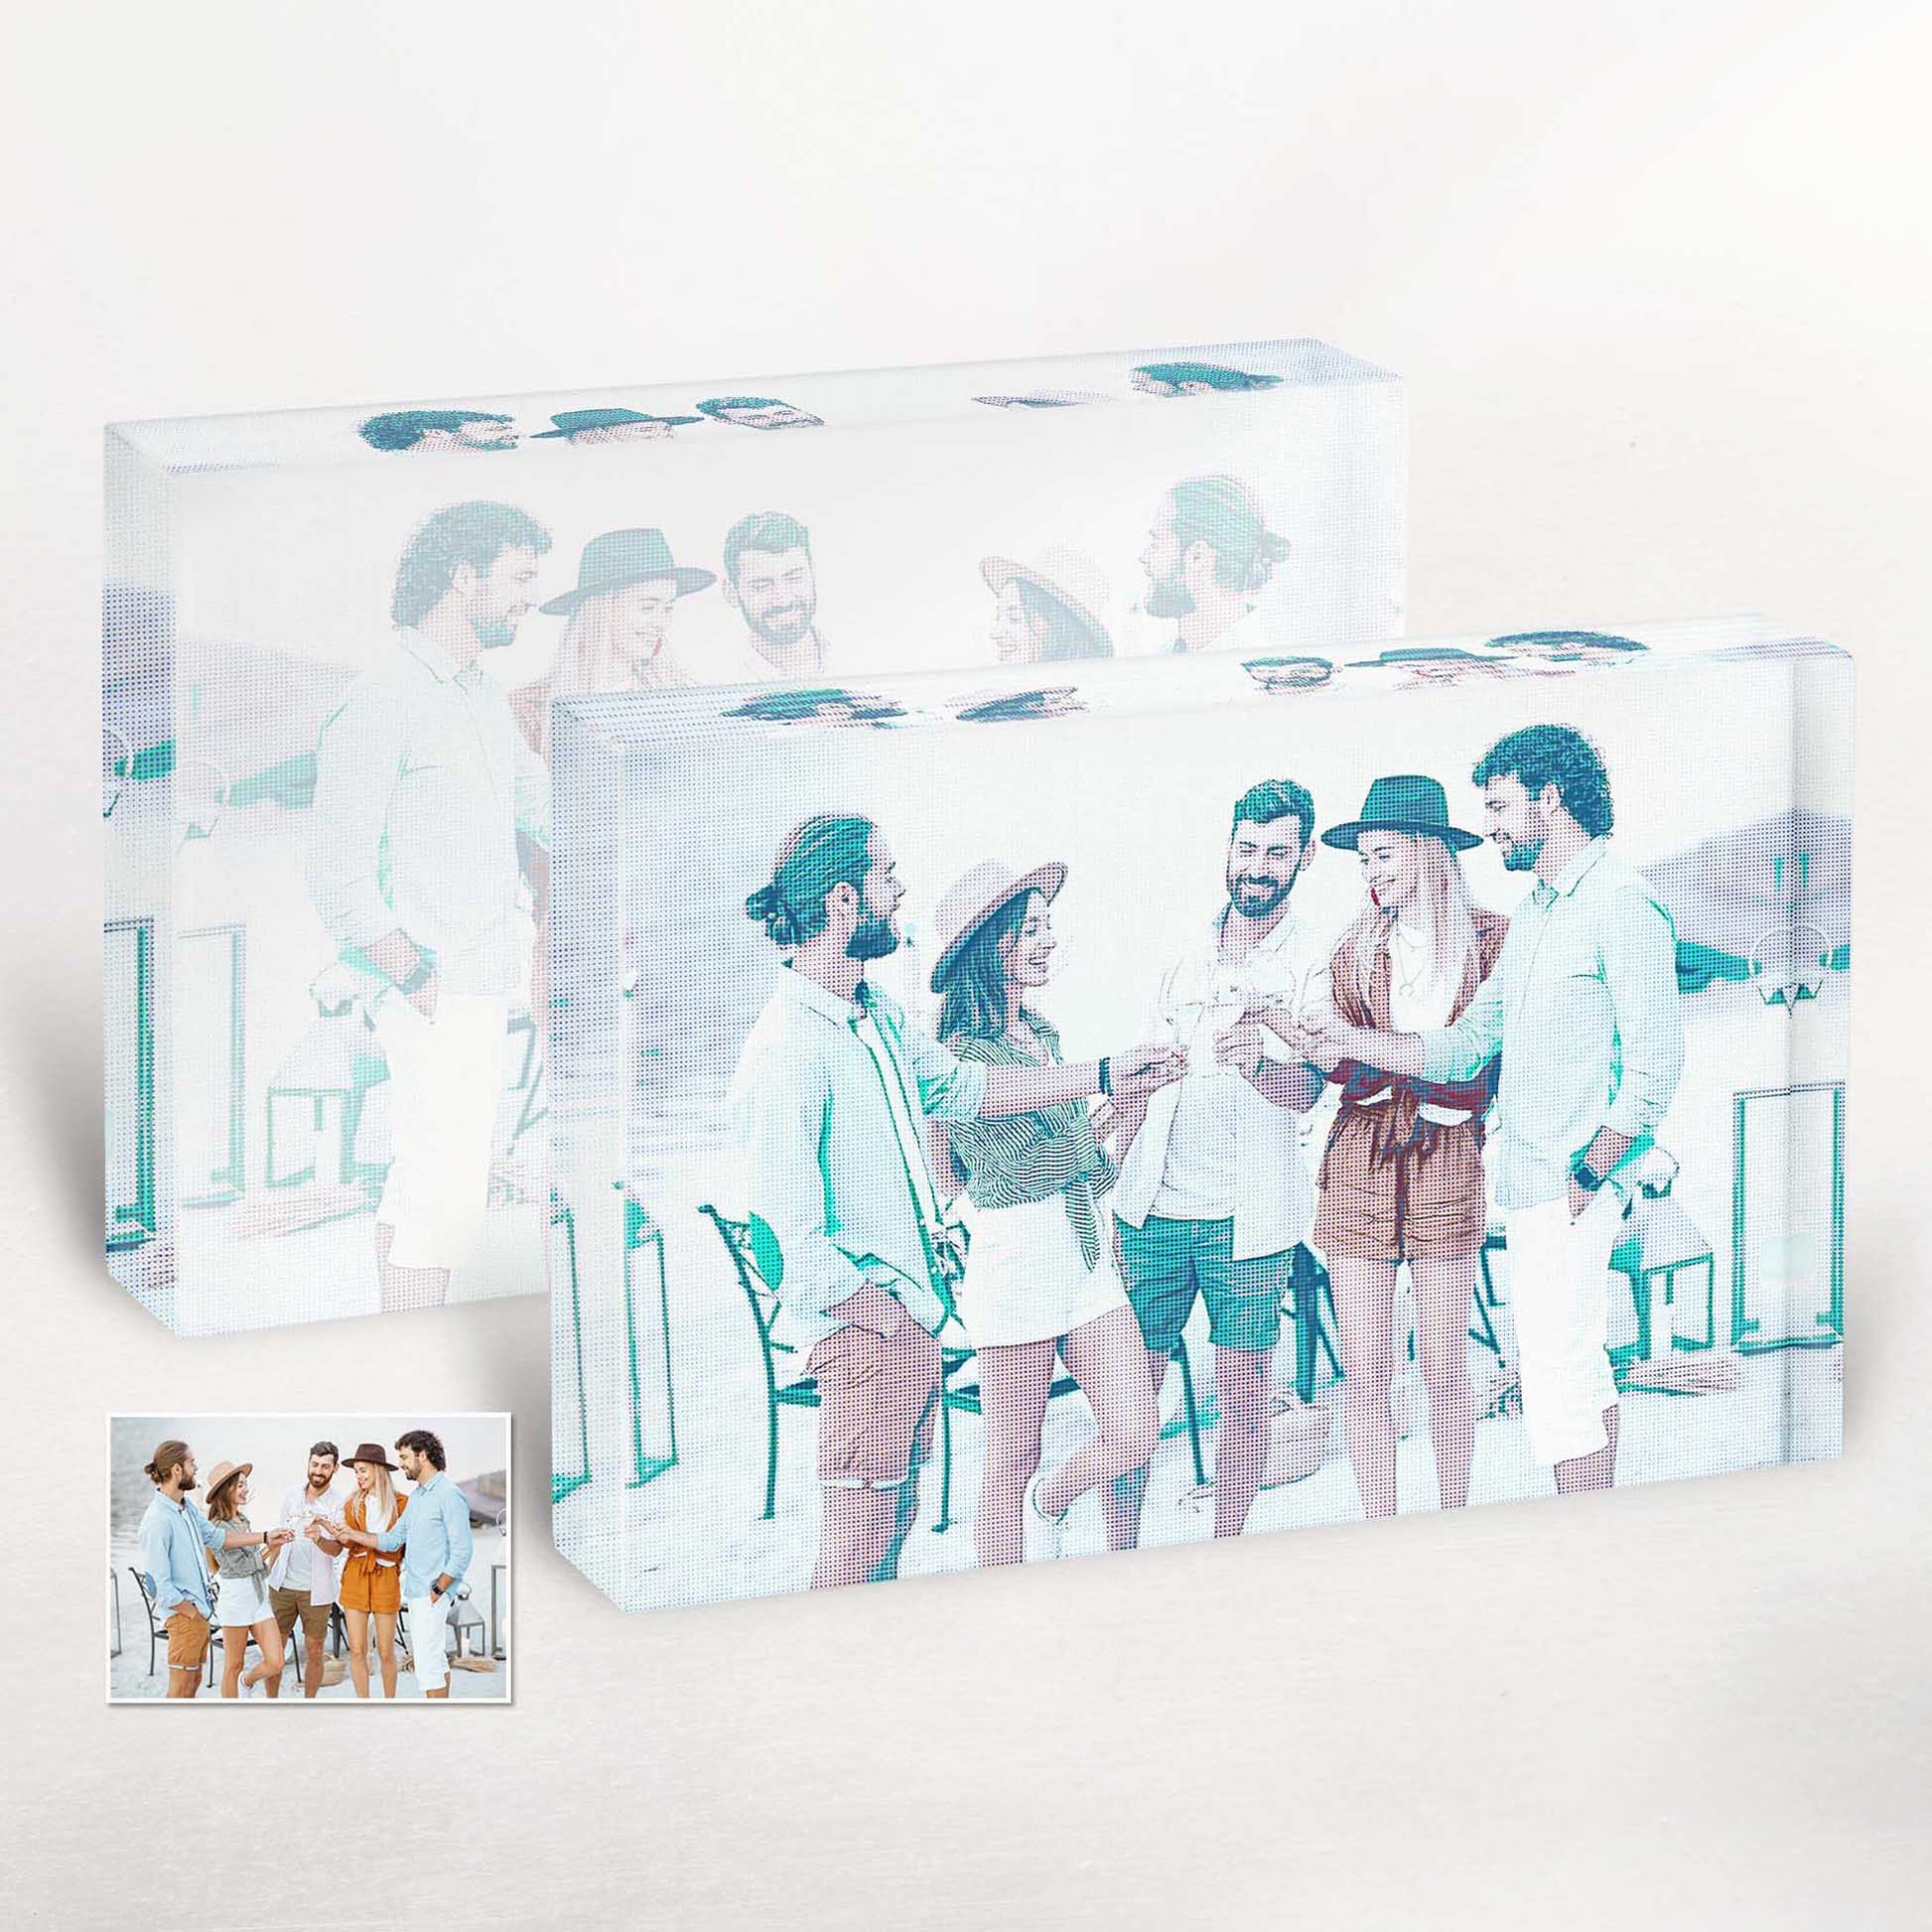 Add a touch of nostalgia to your home decor with the Personalised Green Grunge Acrylic Block Photo. Its oldschool charm, combined with a halftone design, creates a fun and playful aesthetic